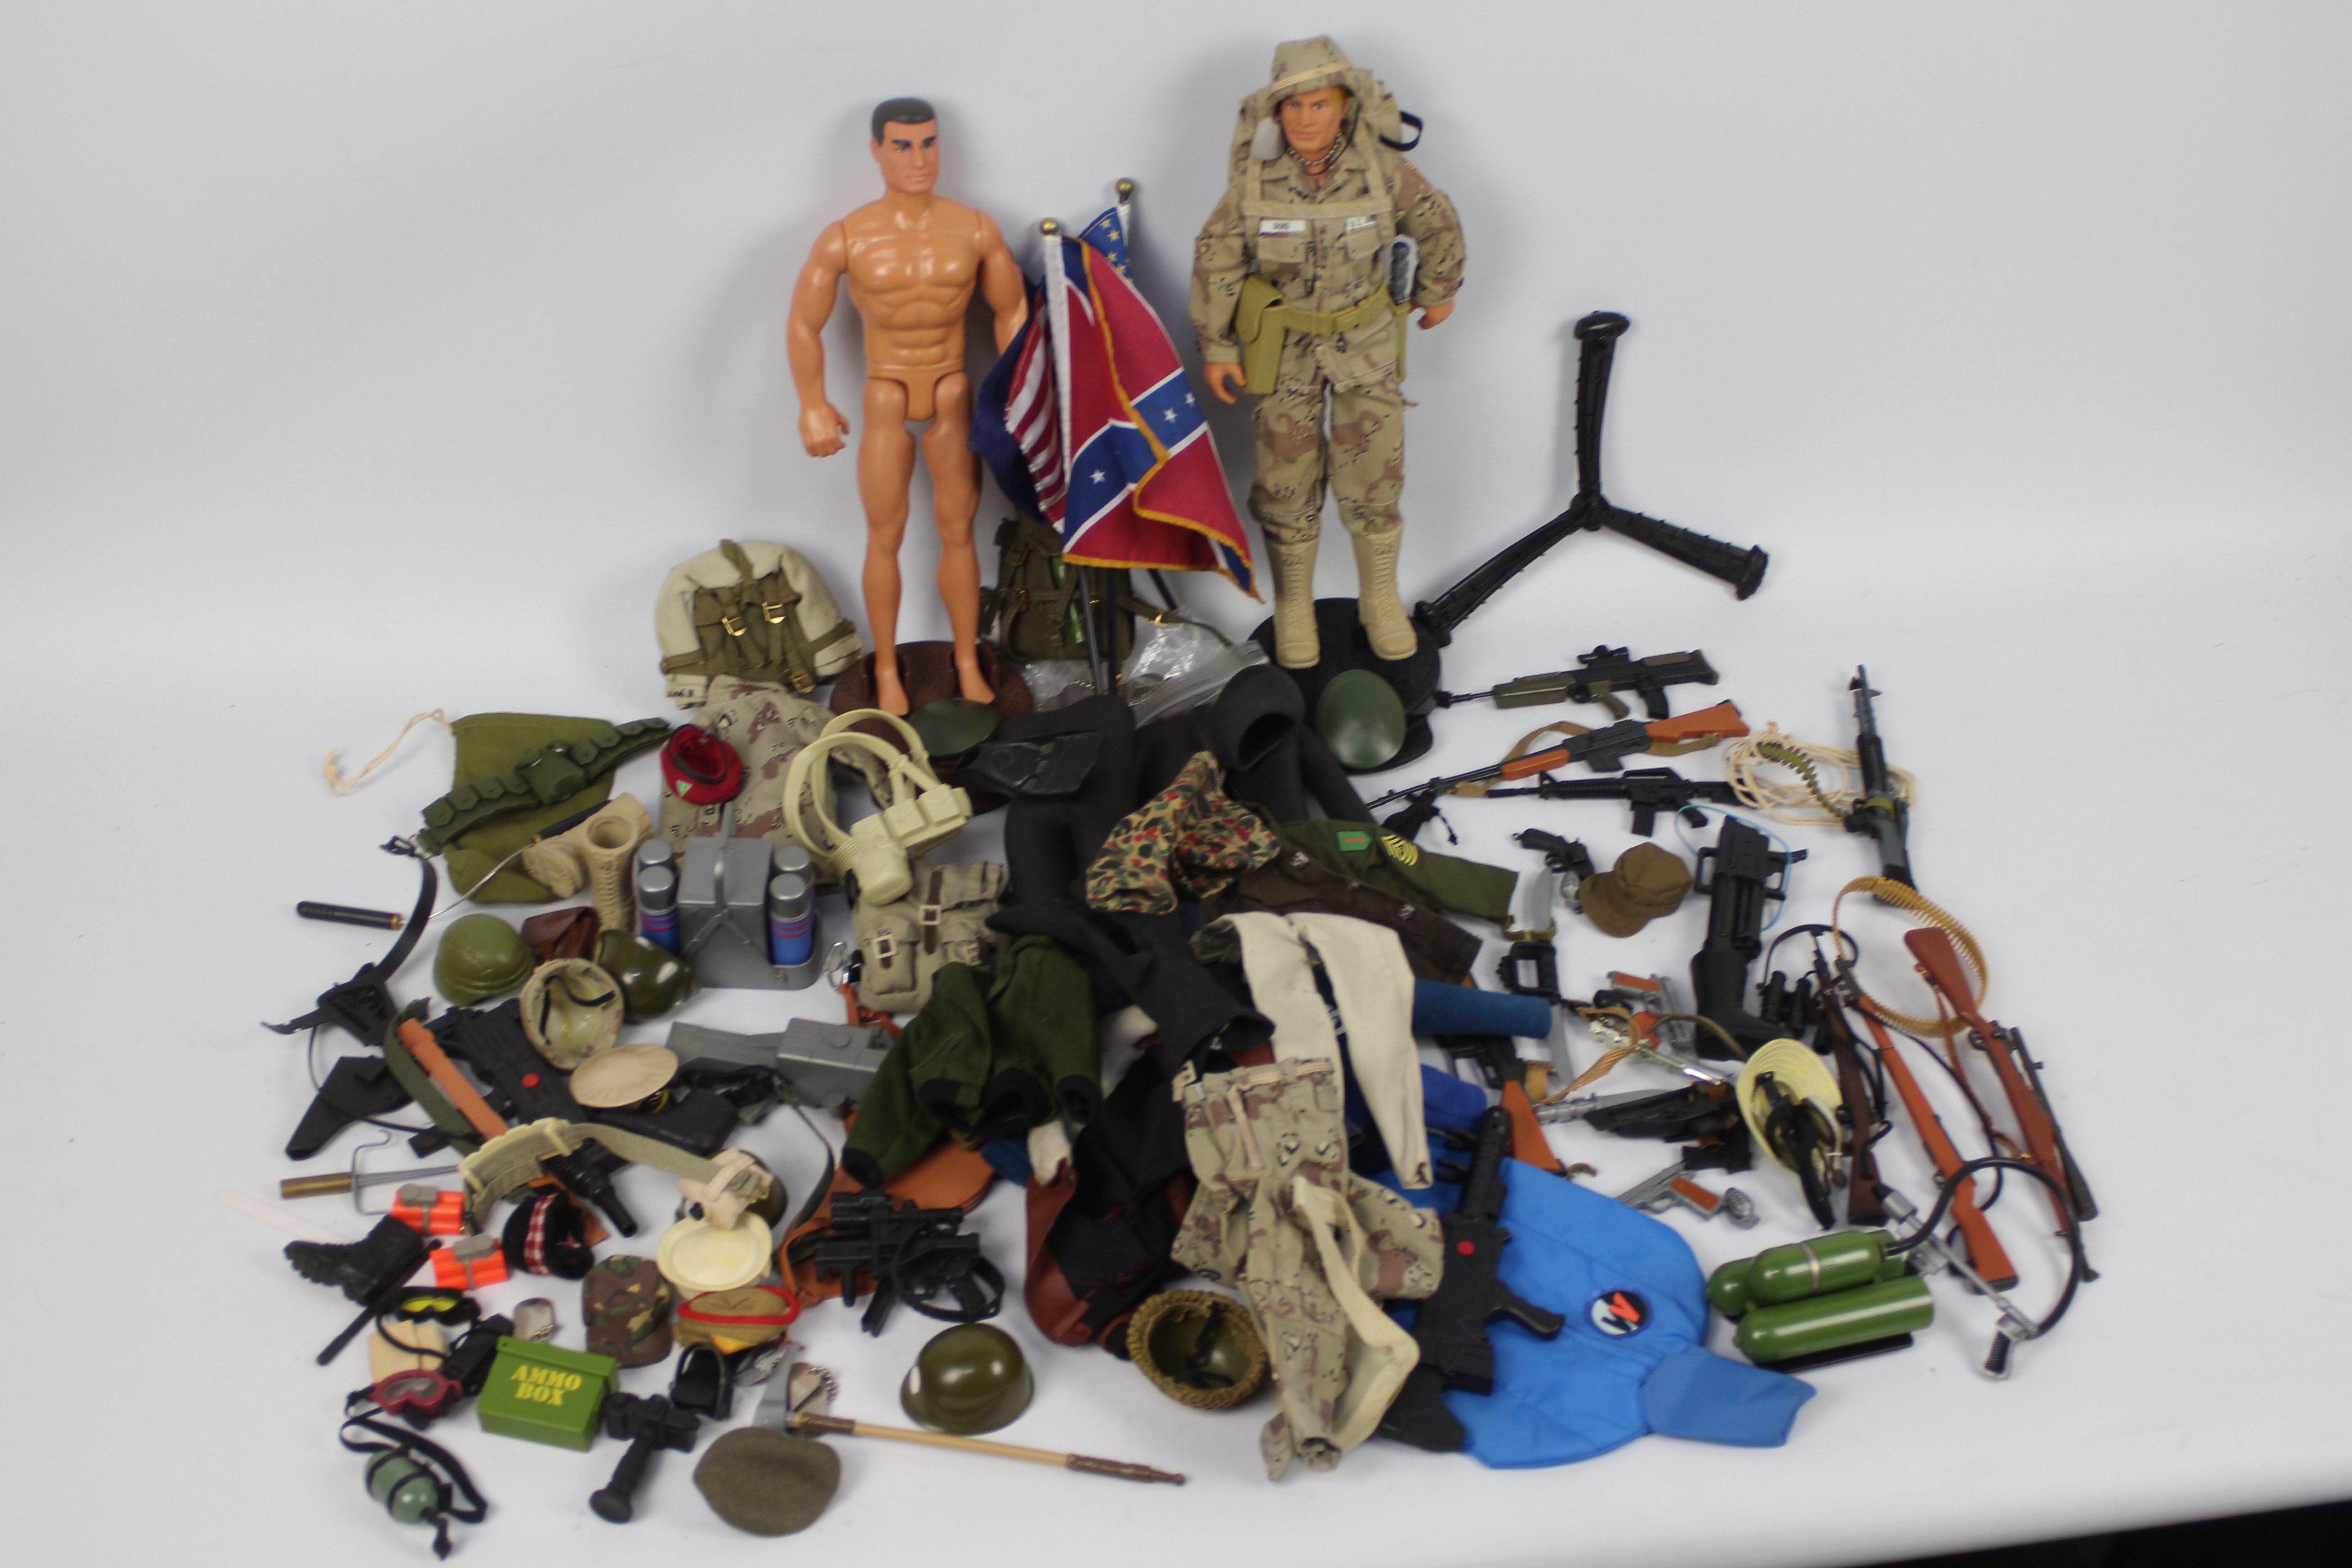 Hasbro - GI Joe - Others - Two unboxed modern Action Man and GI Joe figures with a large quantity